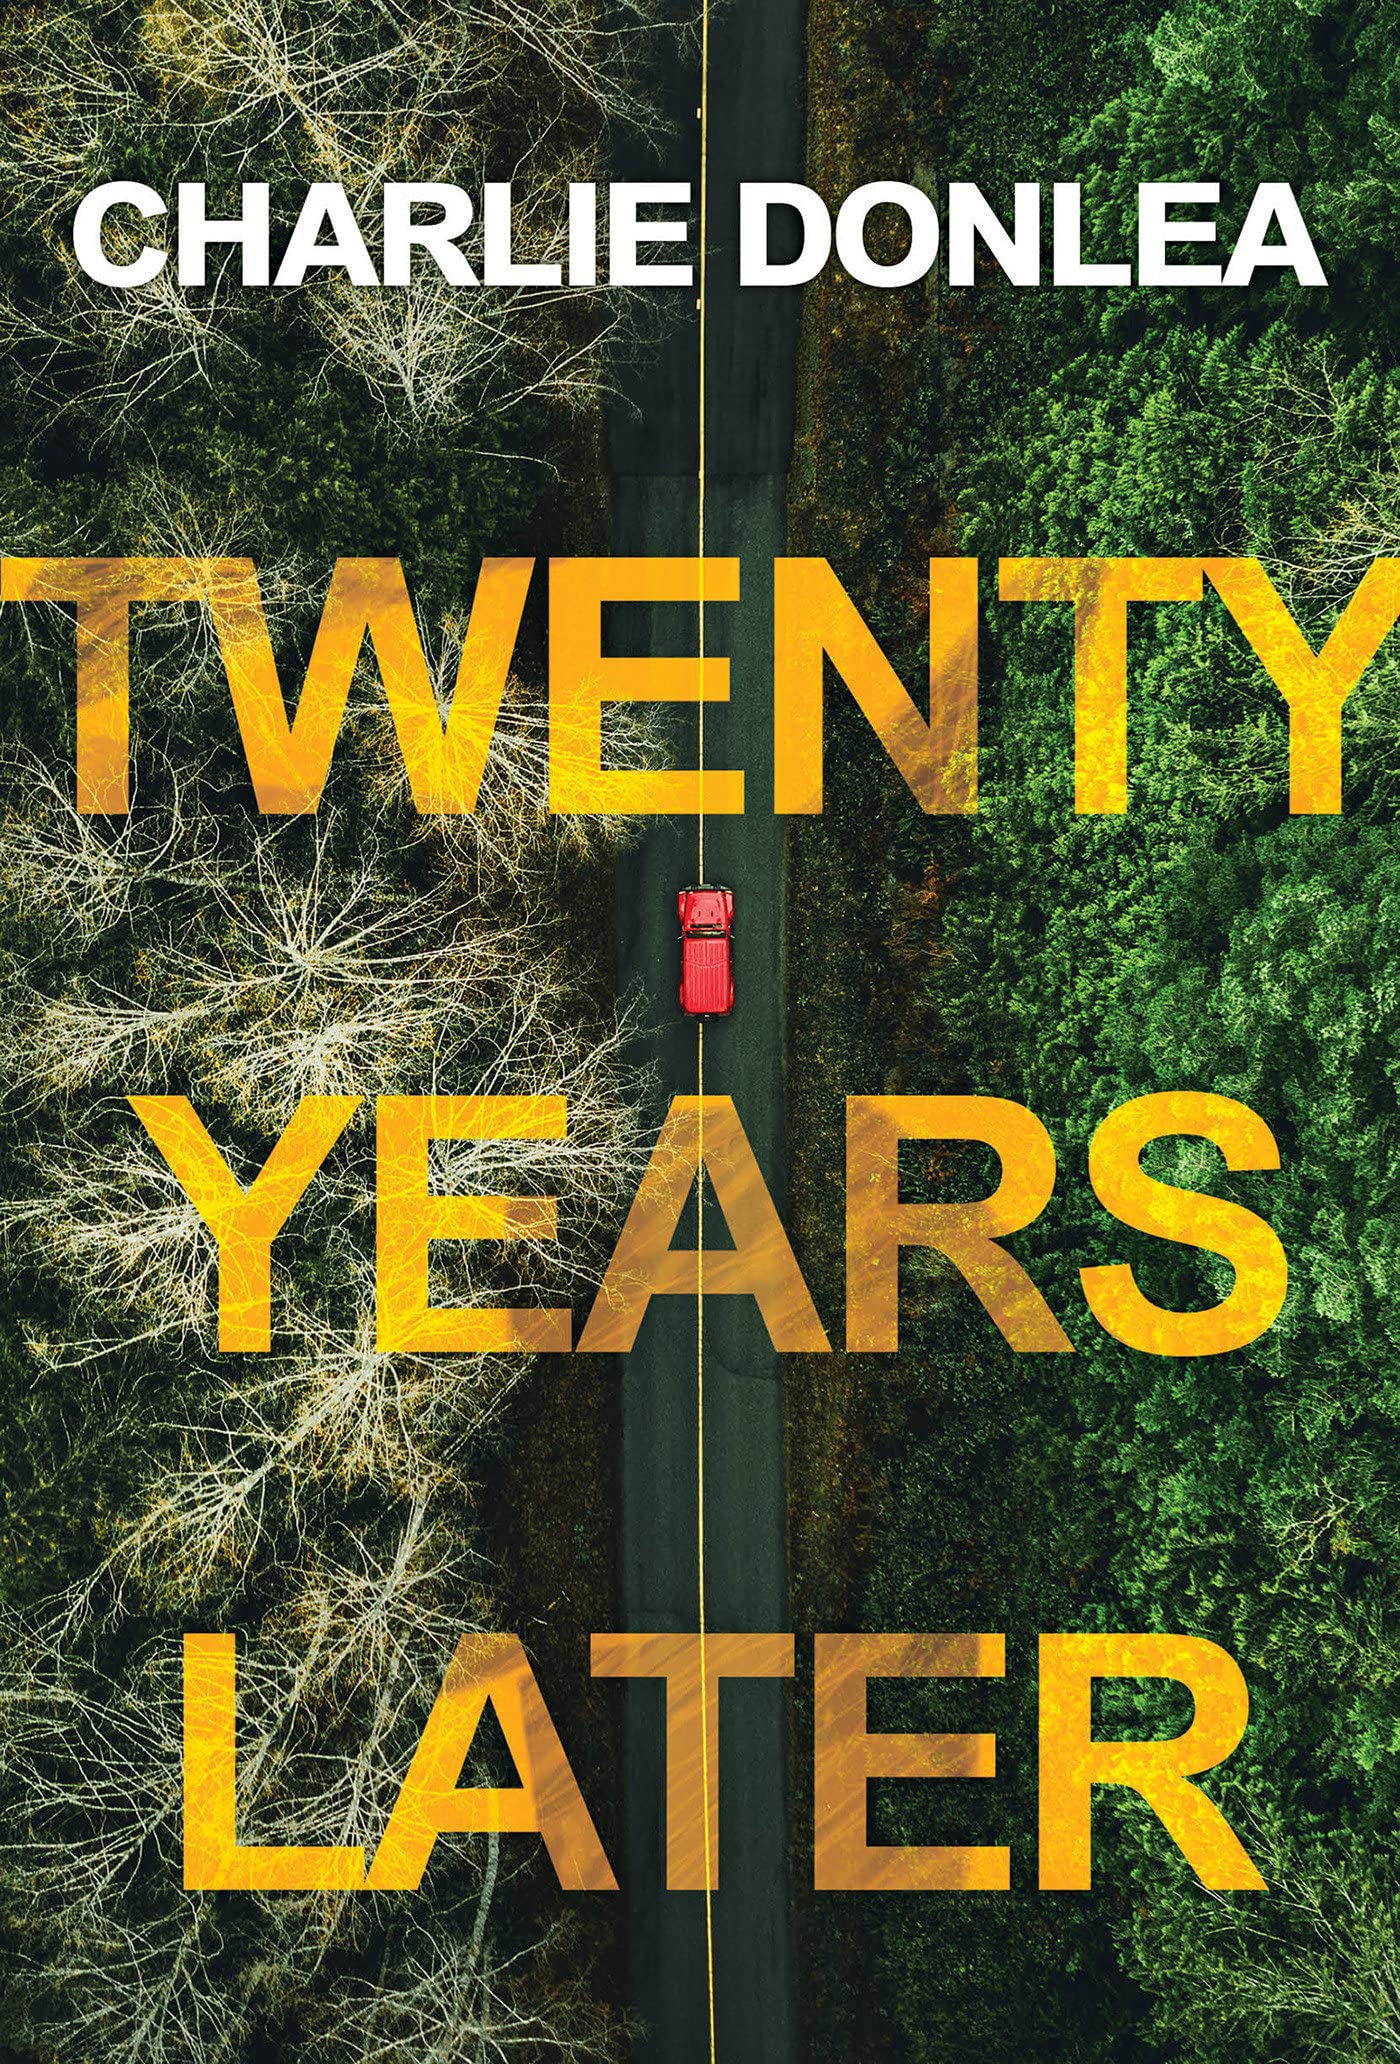 Twenty Years Later: A Riveting New Thriller book